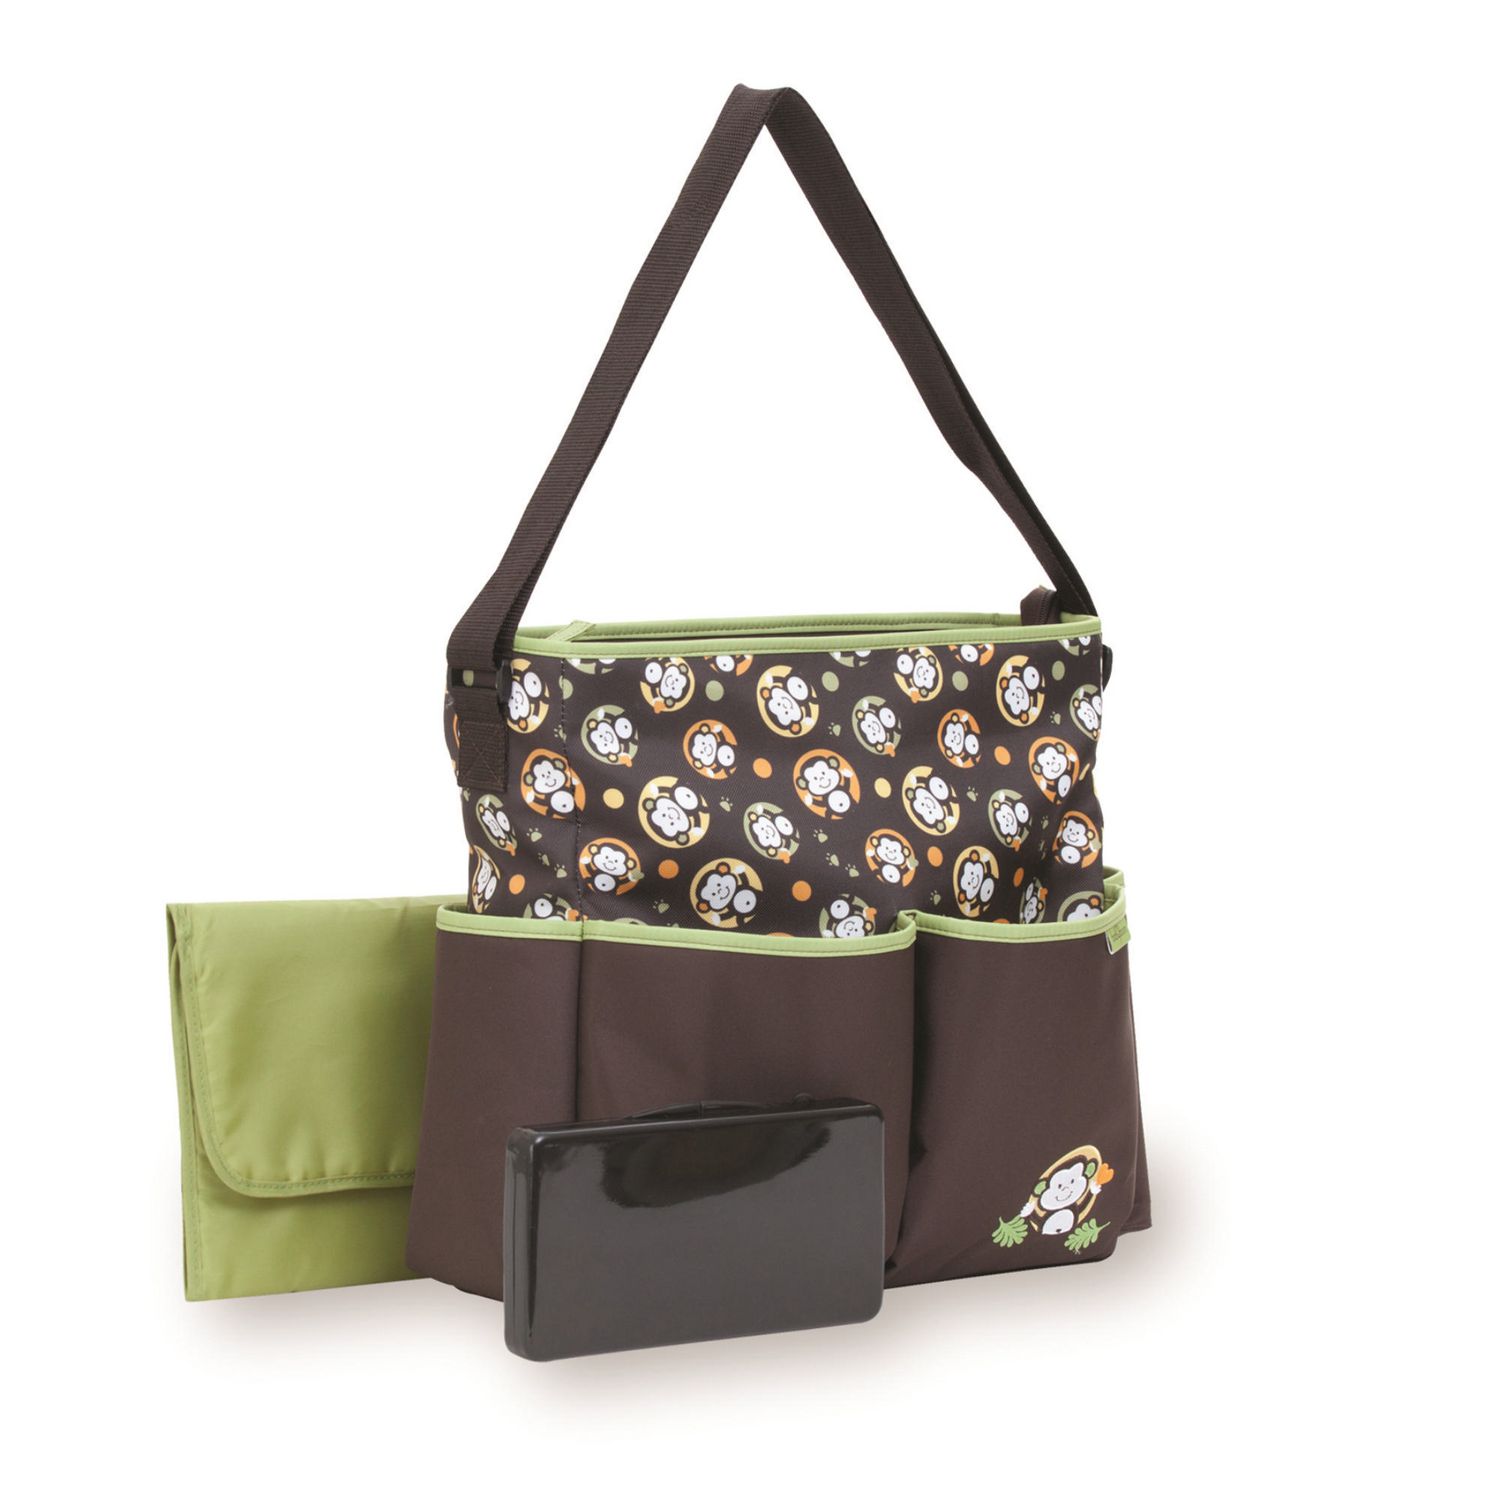 Baby Boom Deluxe Monkey Tote Diaper Bag with Wipes Case | Walmart Canada